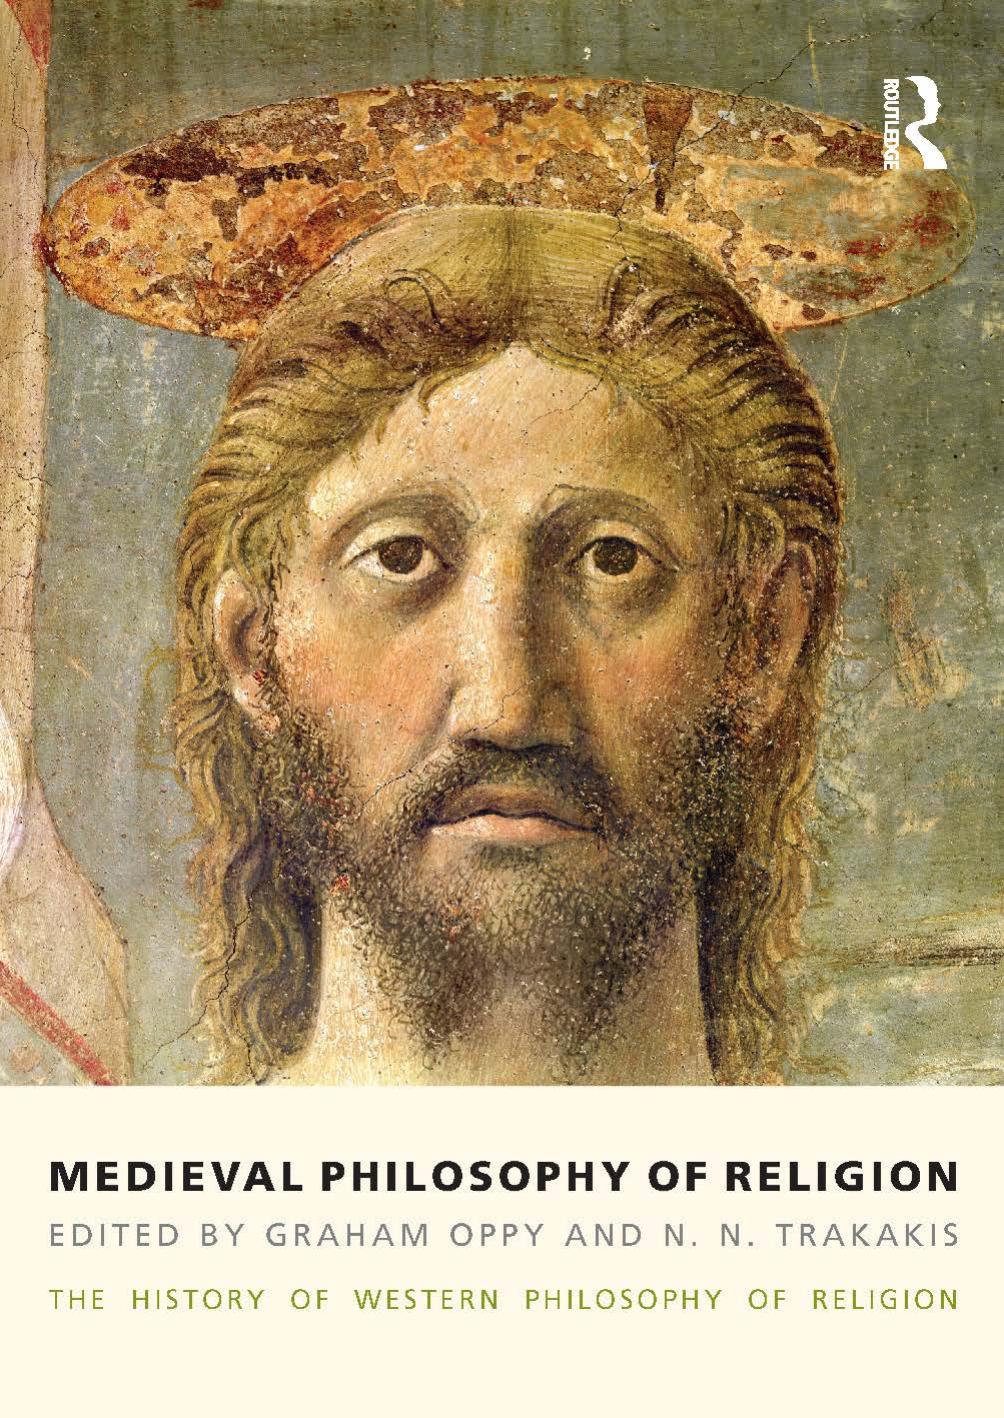 Medieval Philosophy of Religion: The History of Western Philosophy of Religion